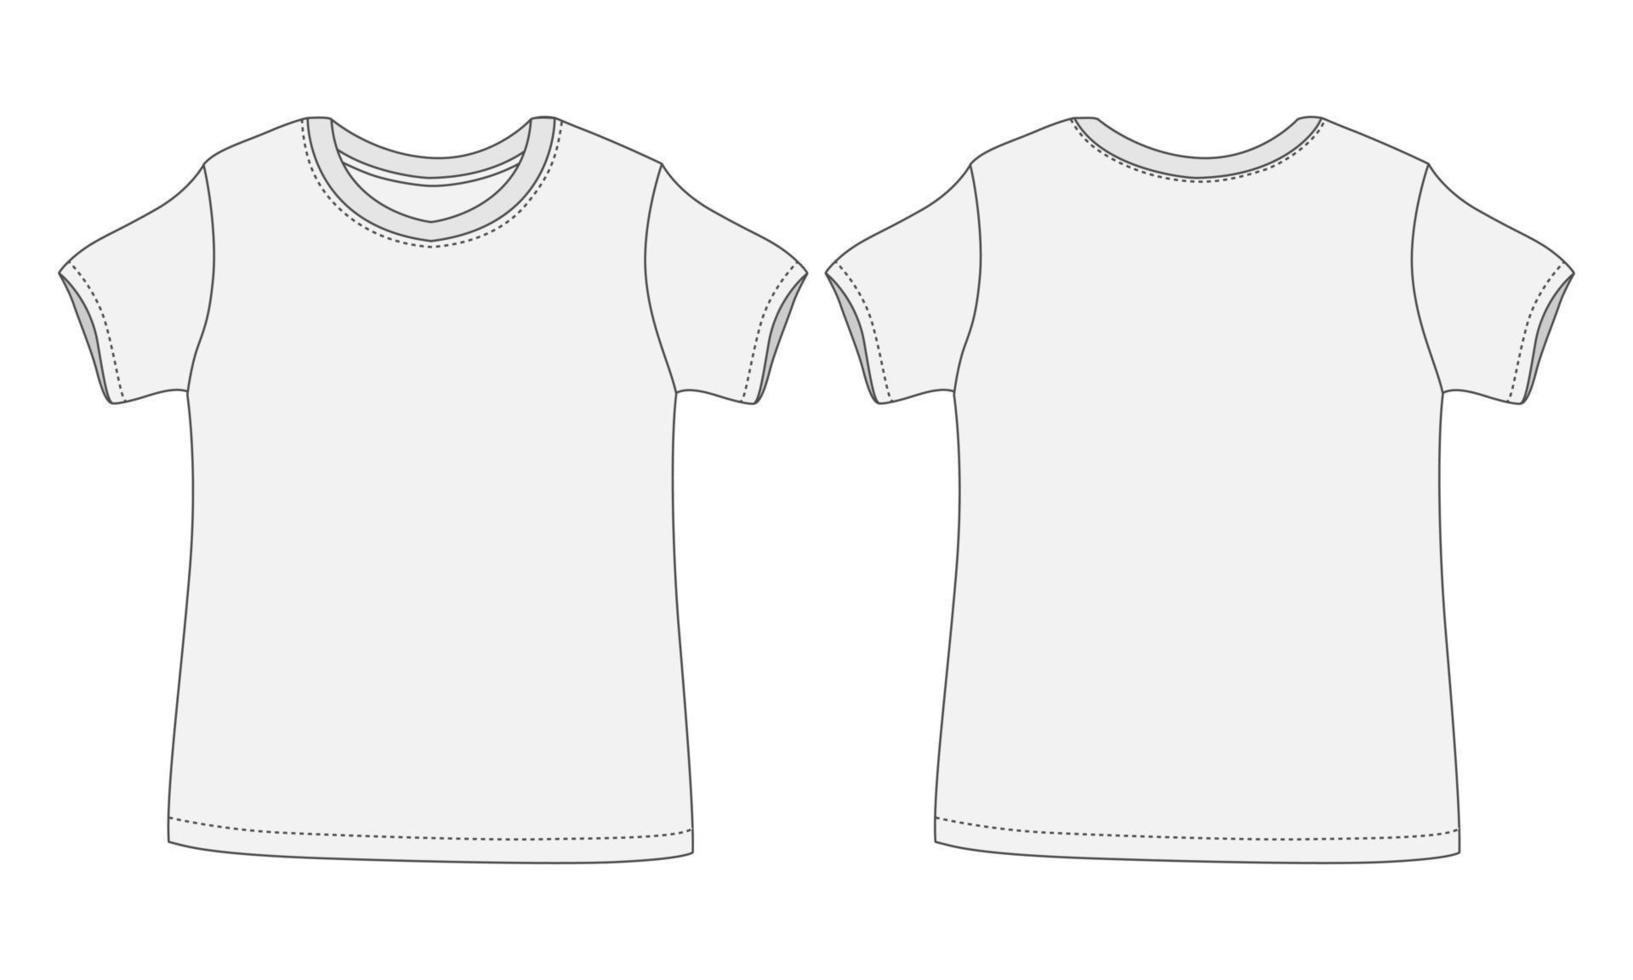 Basic Tee shirt overall technical fashion flat drawing template. Blank flat Short sleeve t-Shirt design for kids. Vector art illustration Front and Back View.